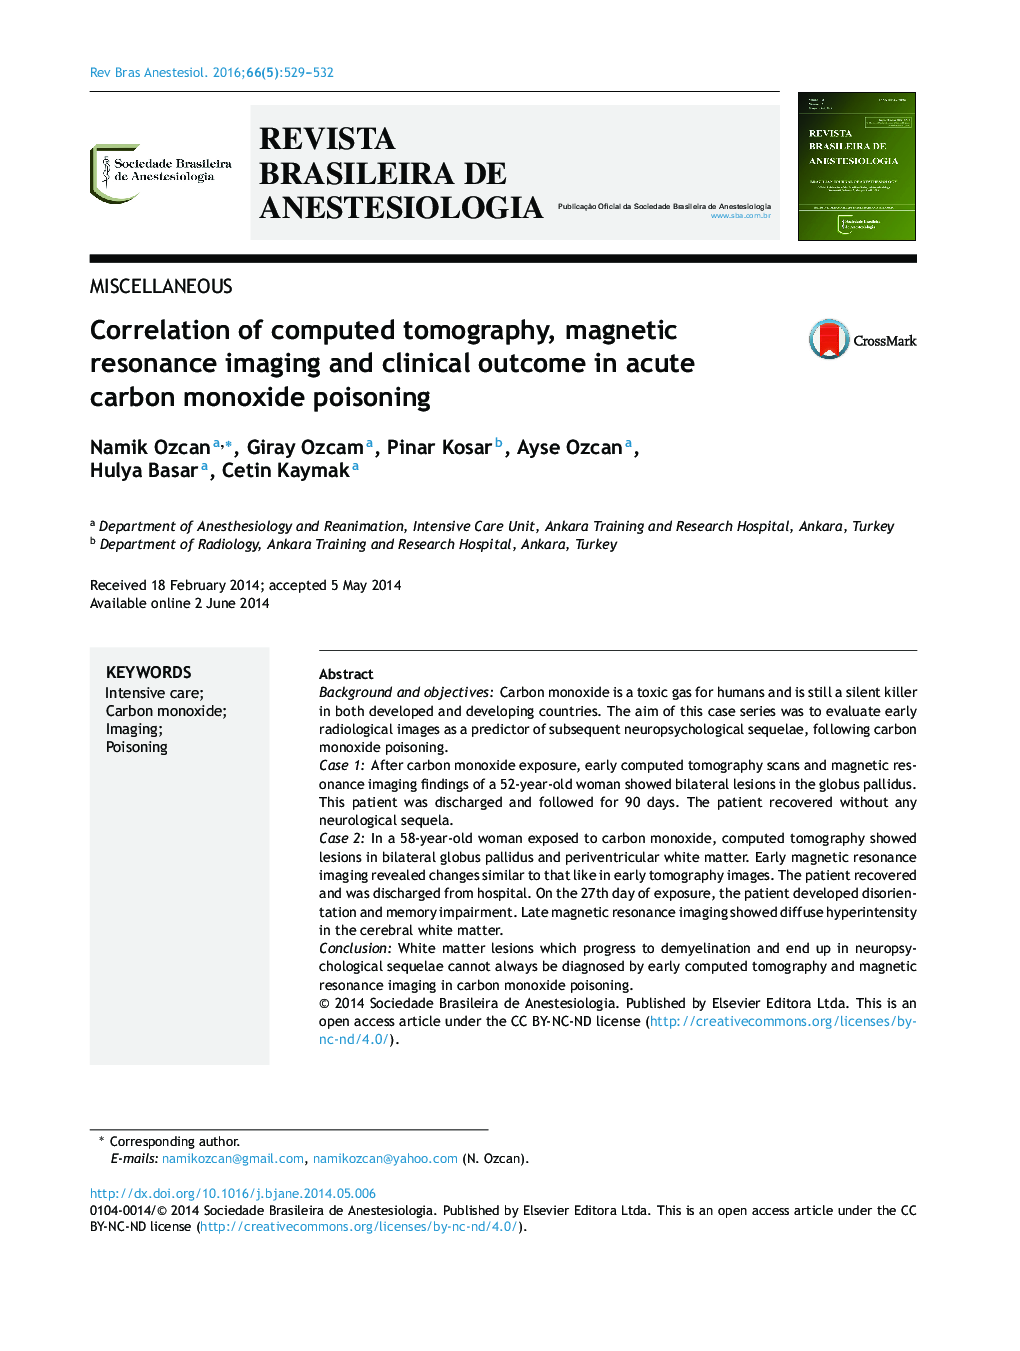 Correlation of computed tomography, magnetic resonance imaging and clinical outcome in acute carbon monoxide poisoning